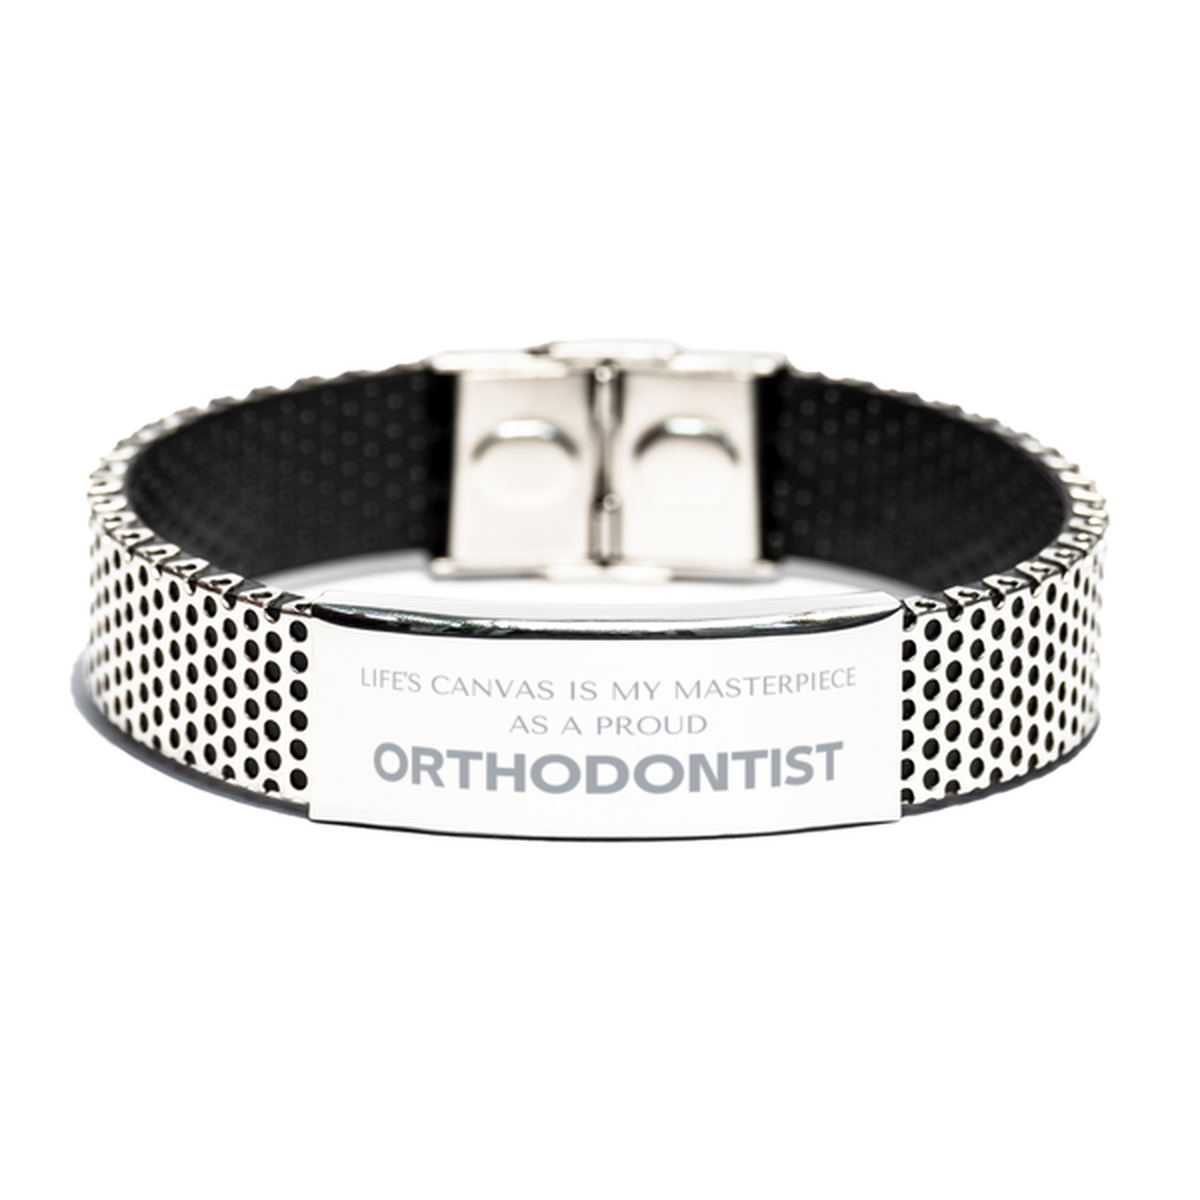 Proud Orthodontist Gifts, Life's canvas is my masterpiece, Epic Birthday Christmas Unique Stainless Steel Bracelet For Orthodontist, Coworkers, Men, Women, Friends